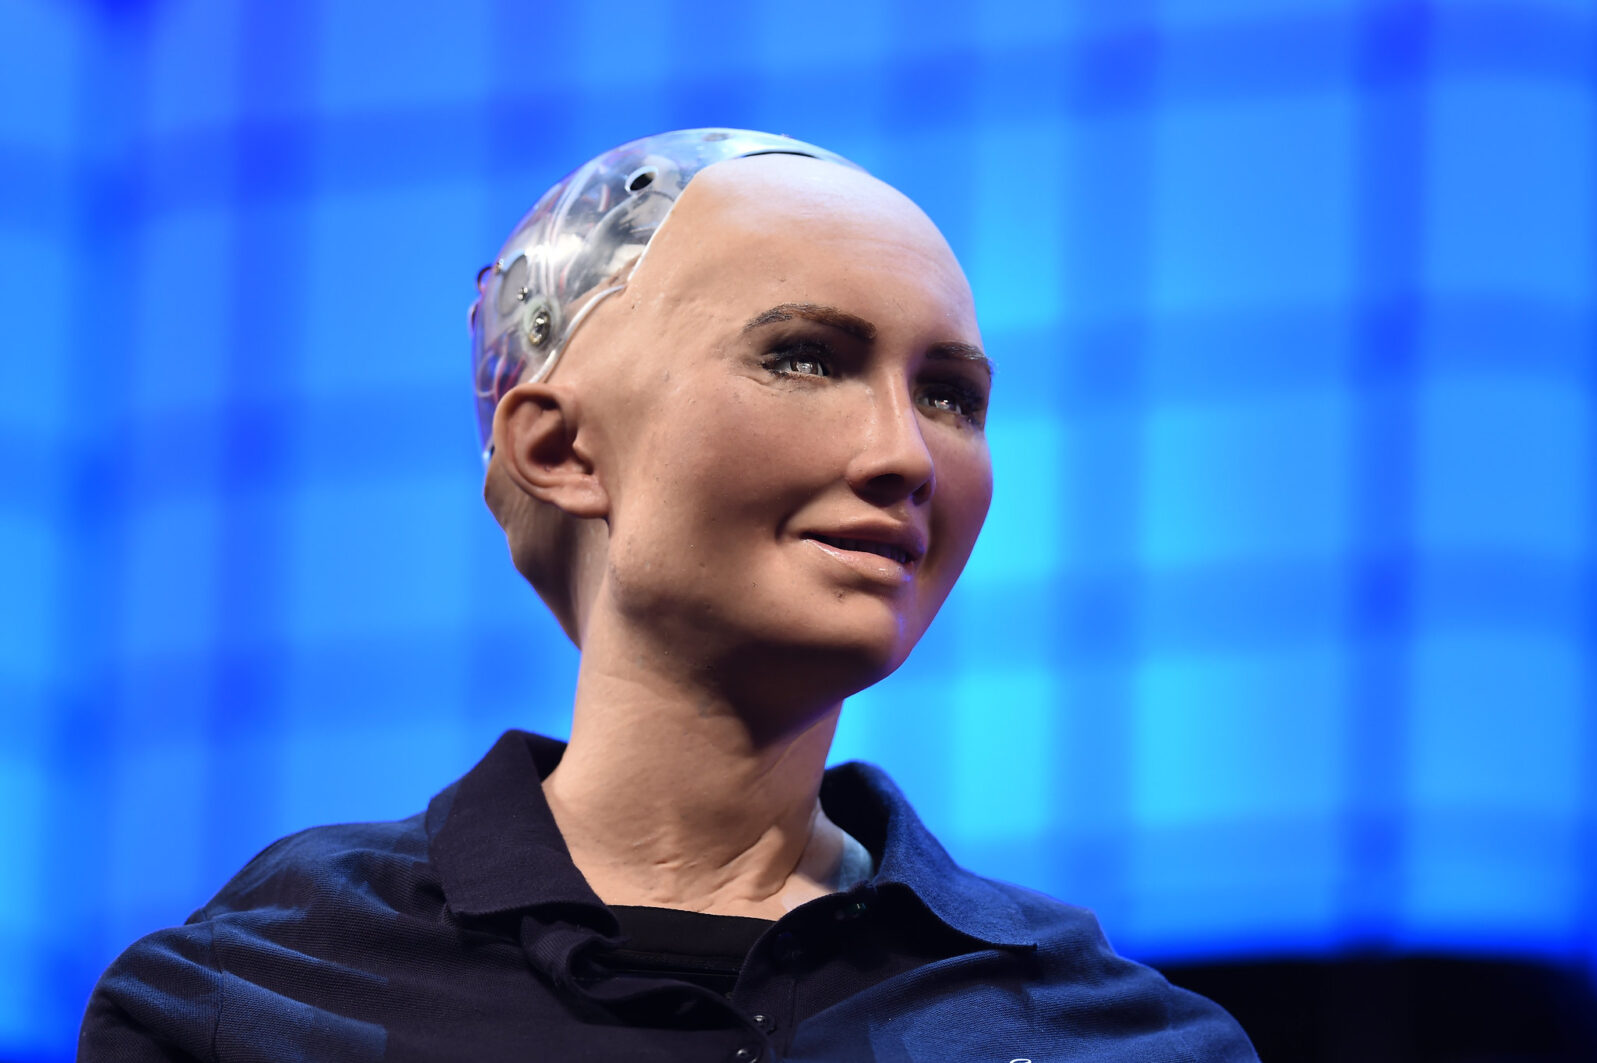 7 November 2017; Sophia the Robot, Chief Humanoid, Hanson Robotics & SingularityNET, on the Centre Stage during the opening day of Web Summit 2017 at Altice Arena in Lisbon. 